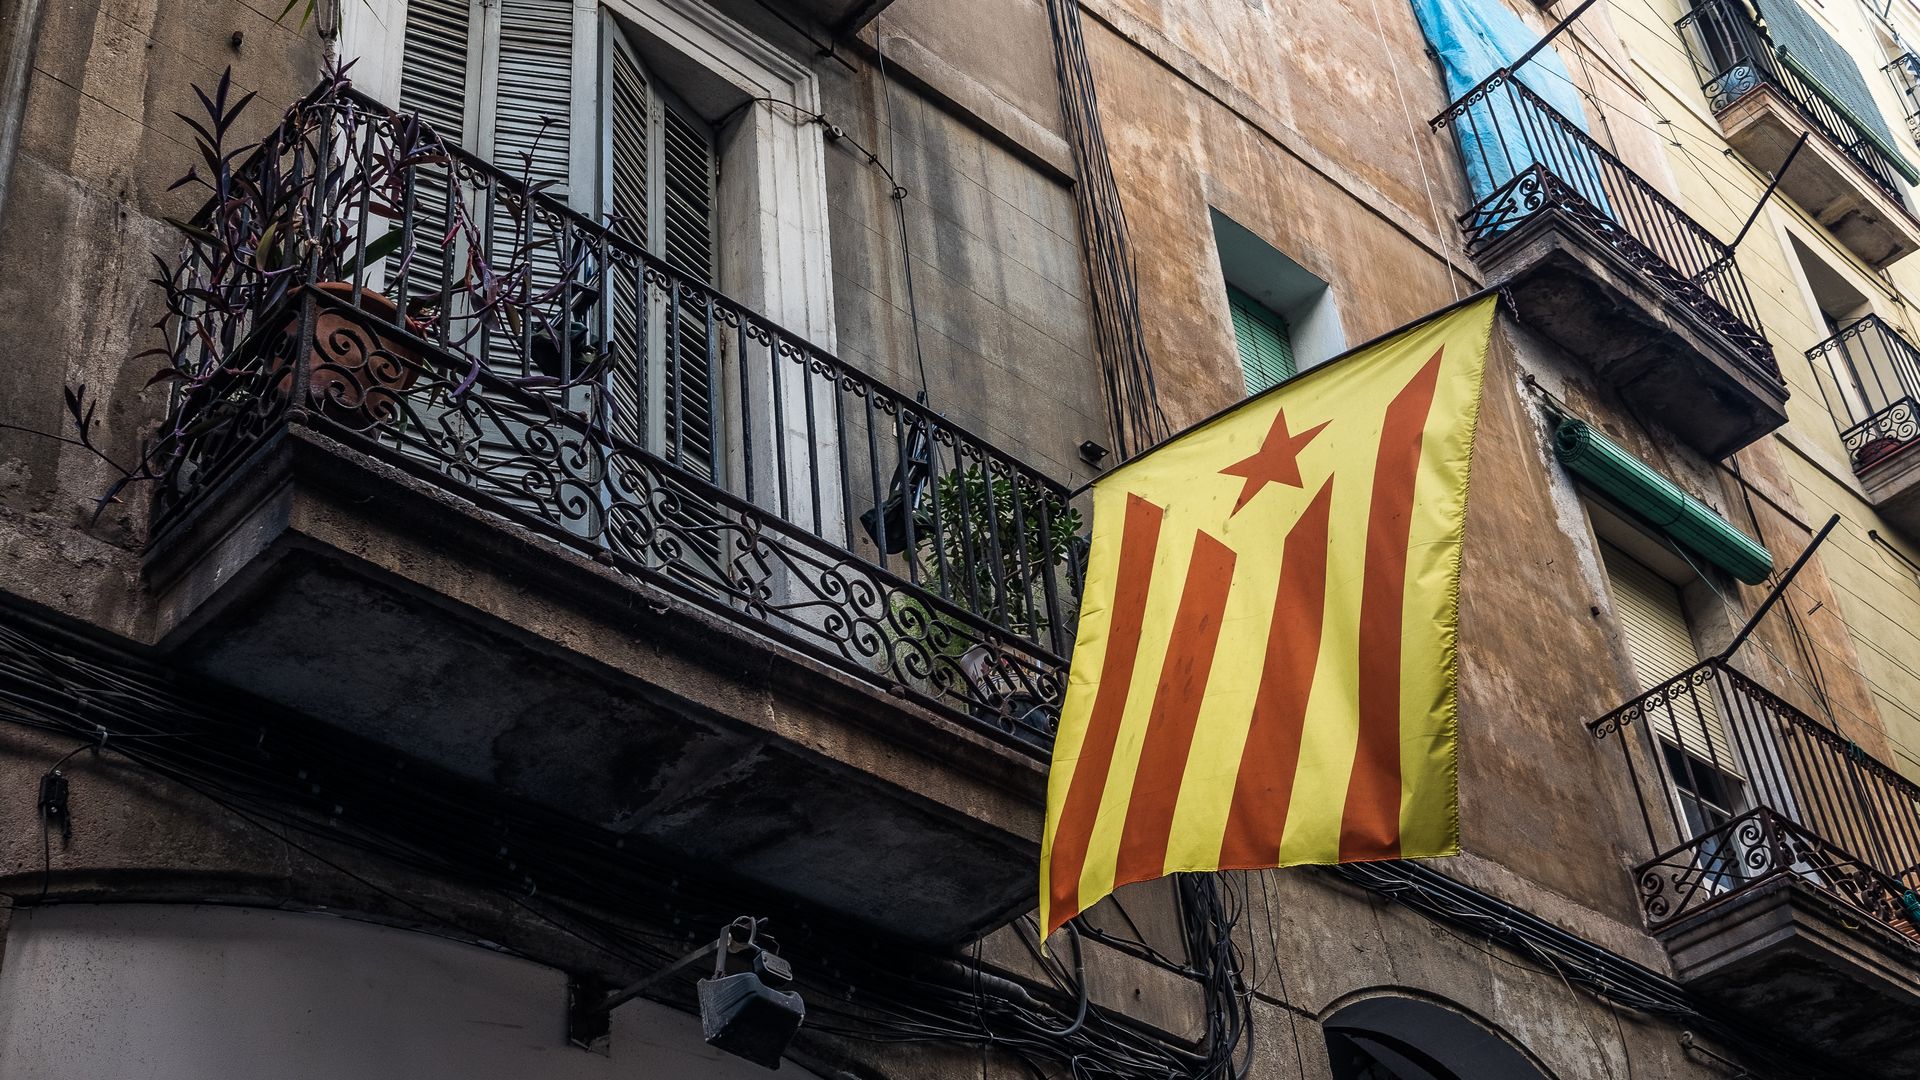 A Catalan independence flag in Barcelona